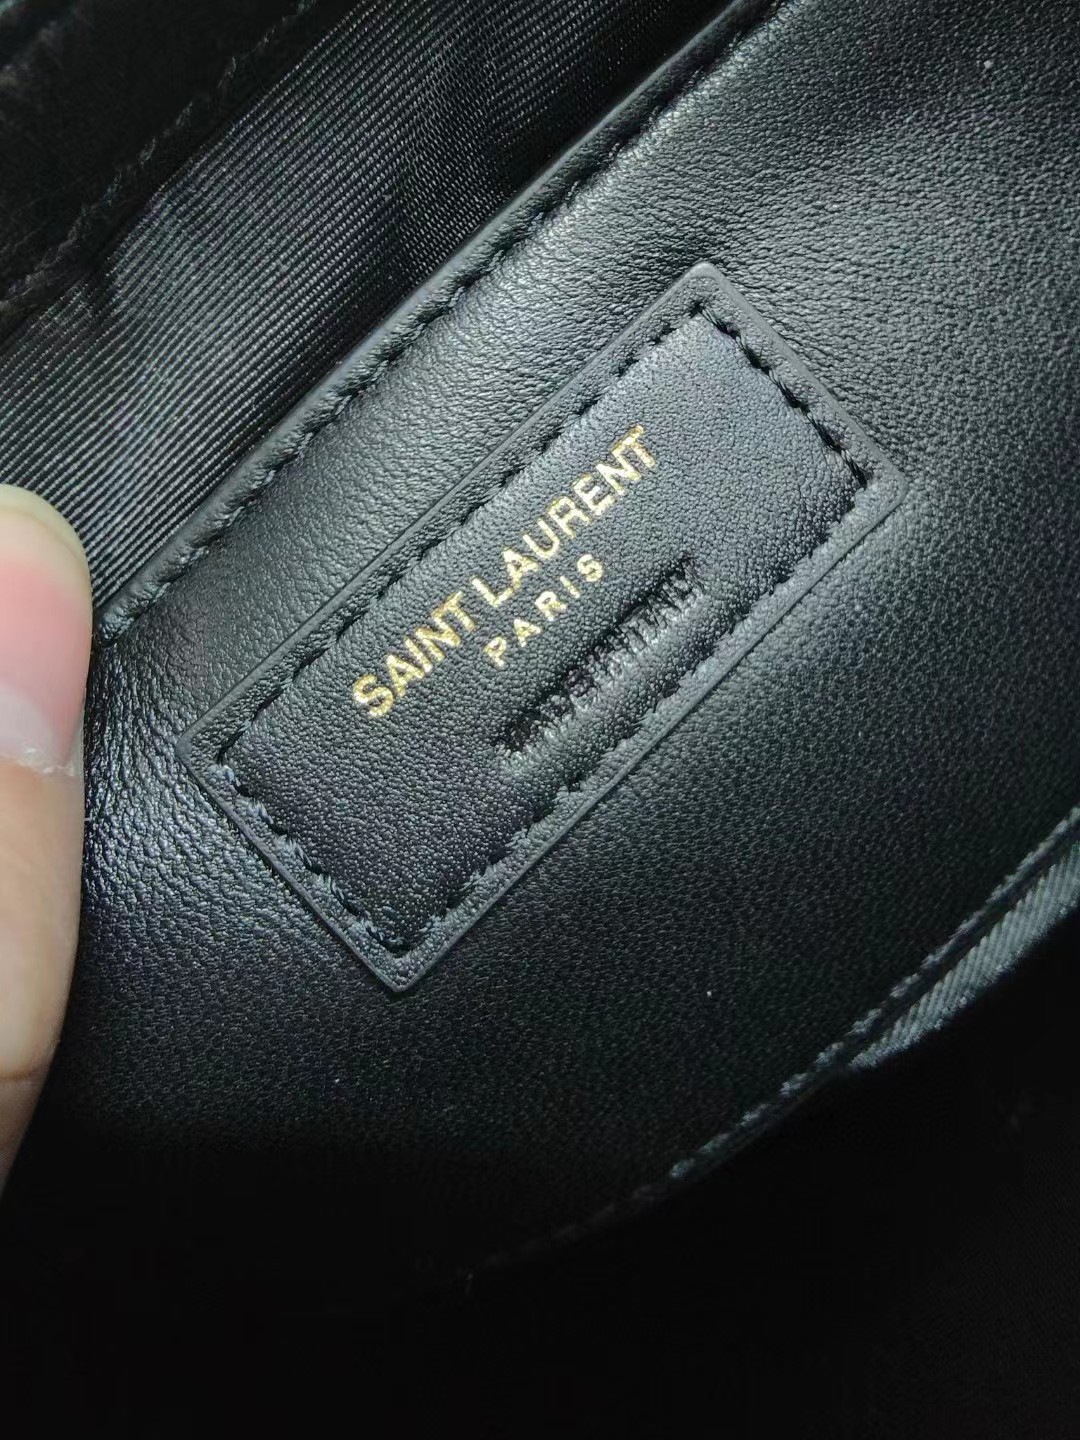 Saint Laurent Icare Maxi Shopping Bag in Quilted Lambskin